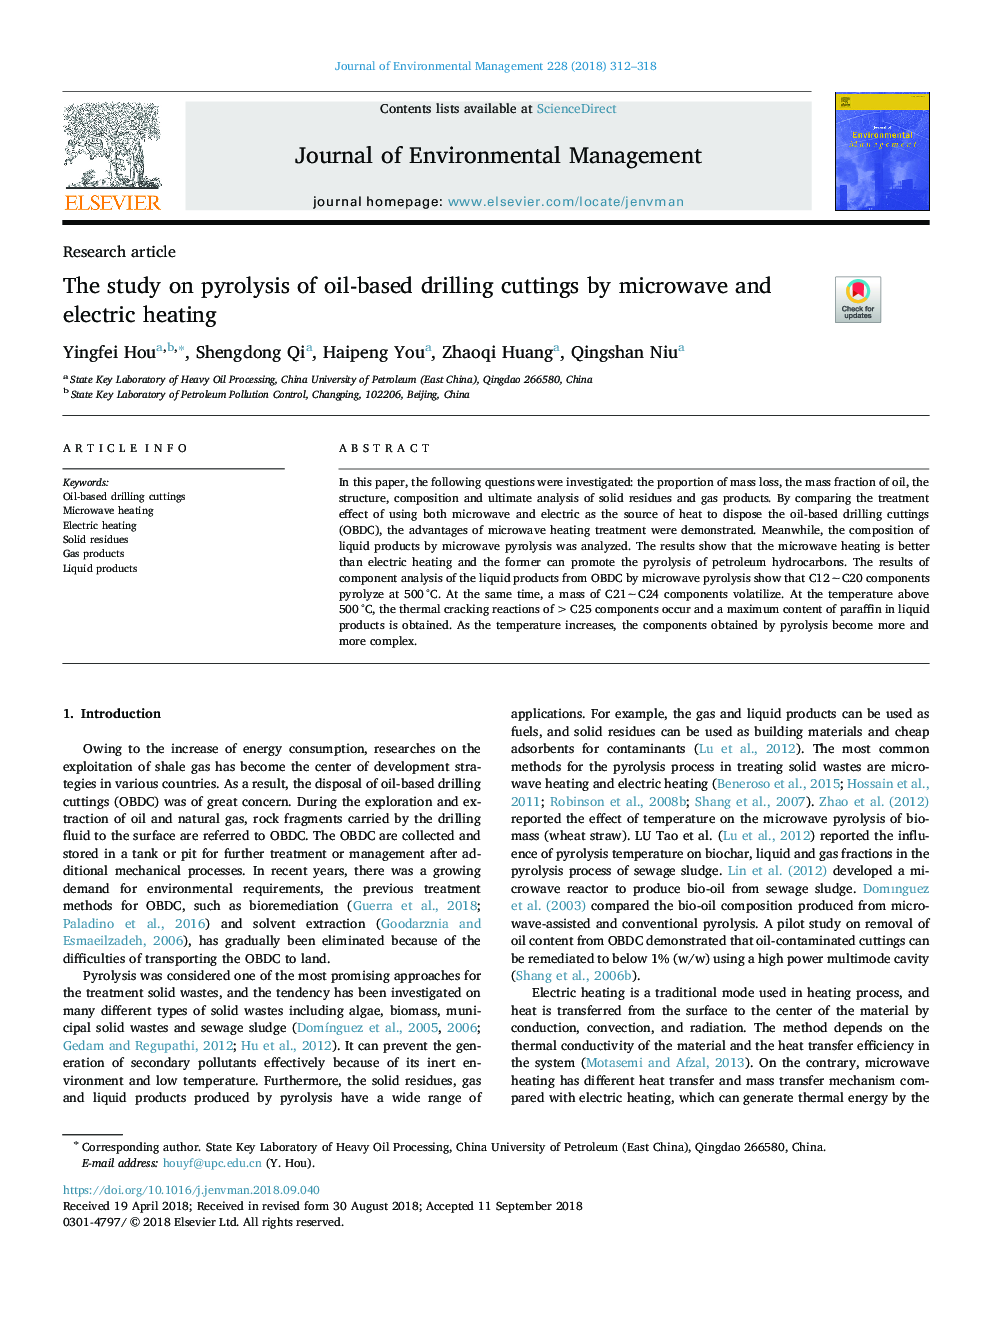 The study on pyrolysis of oil-based drilling cuttings by microwave and electric heating